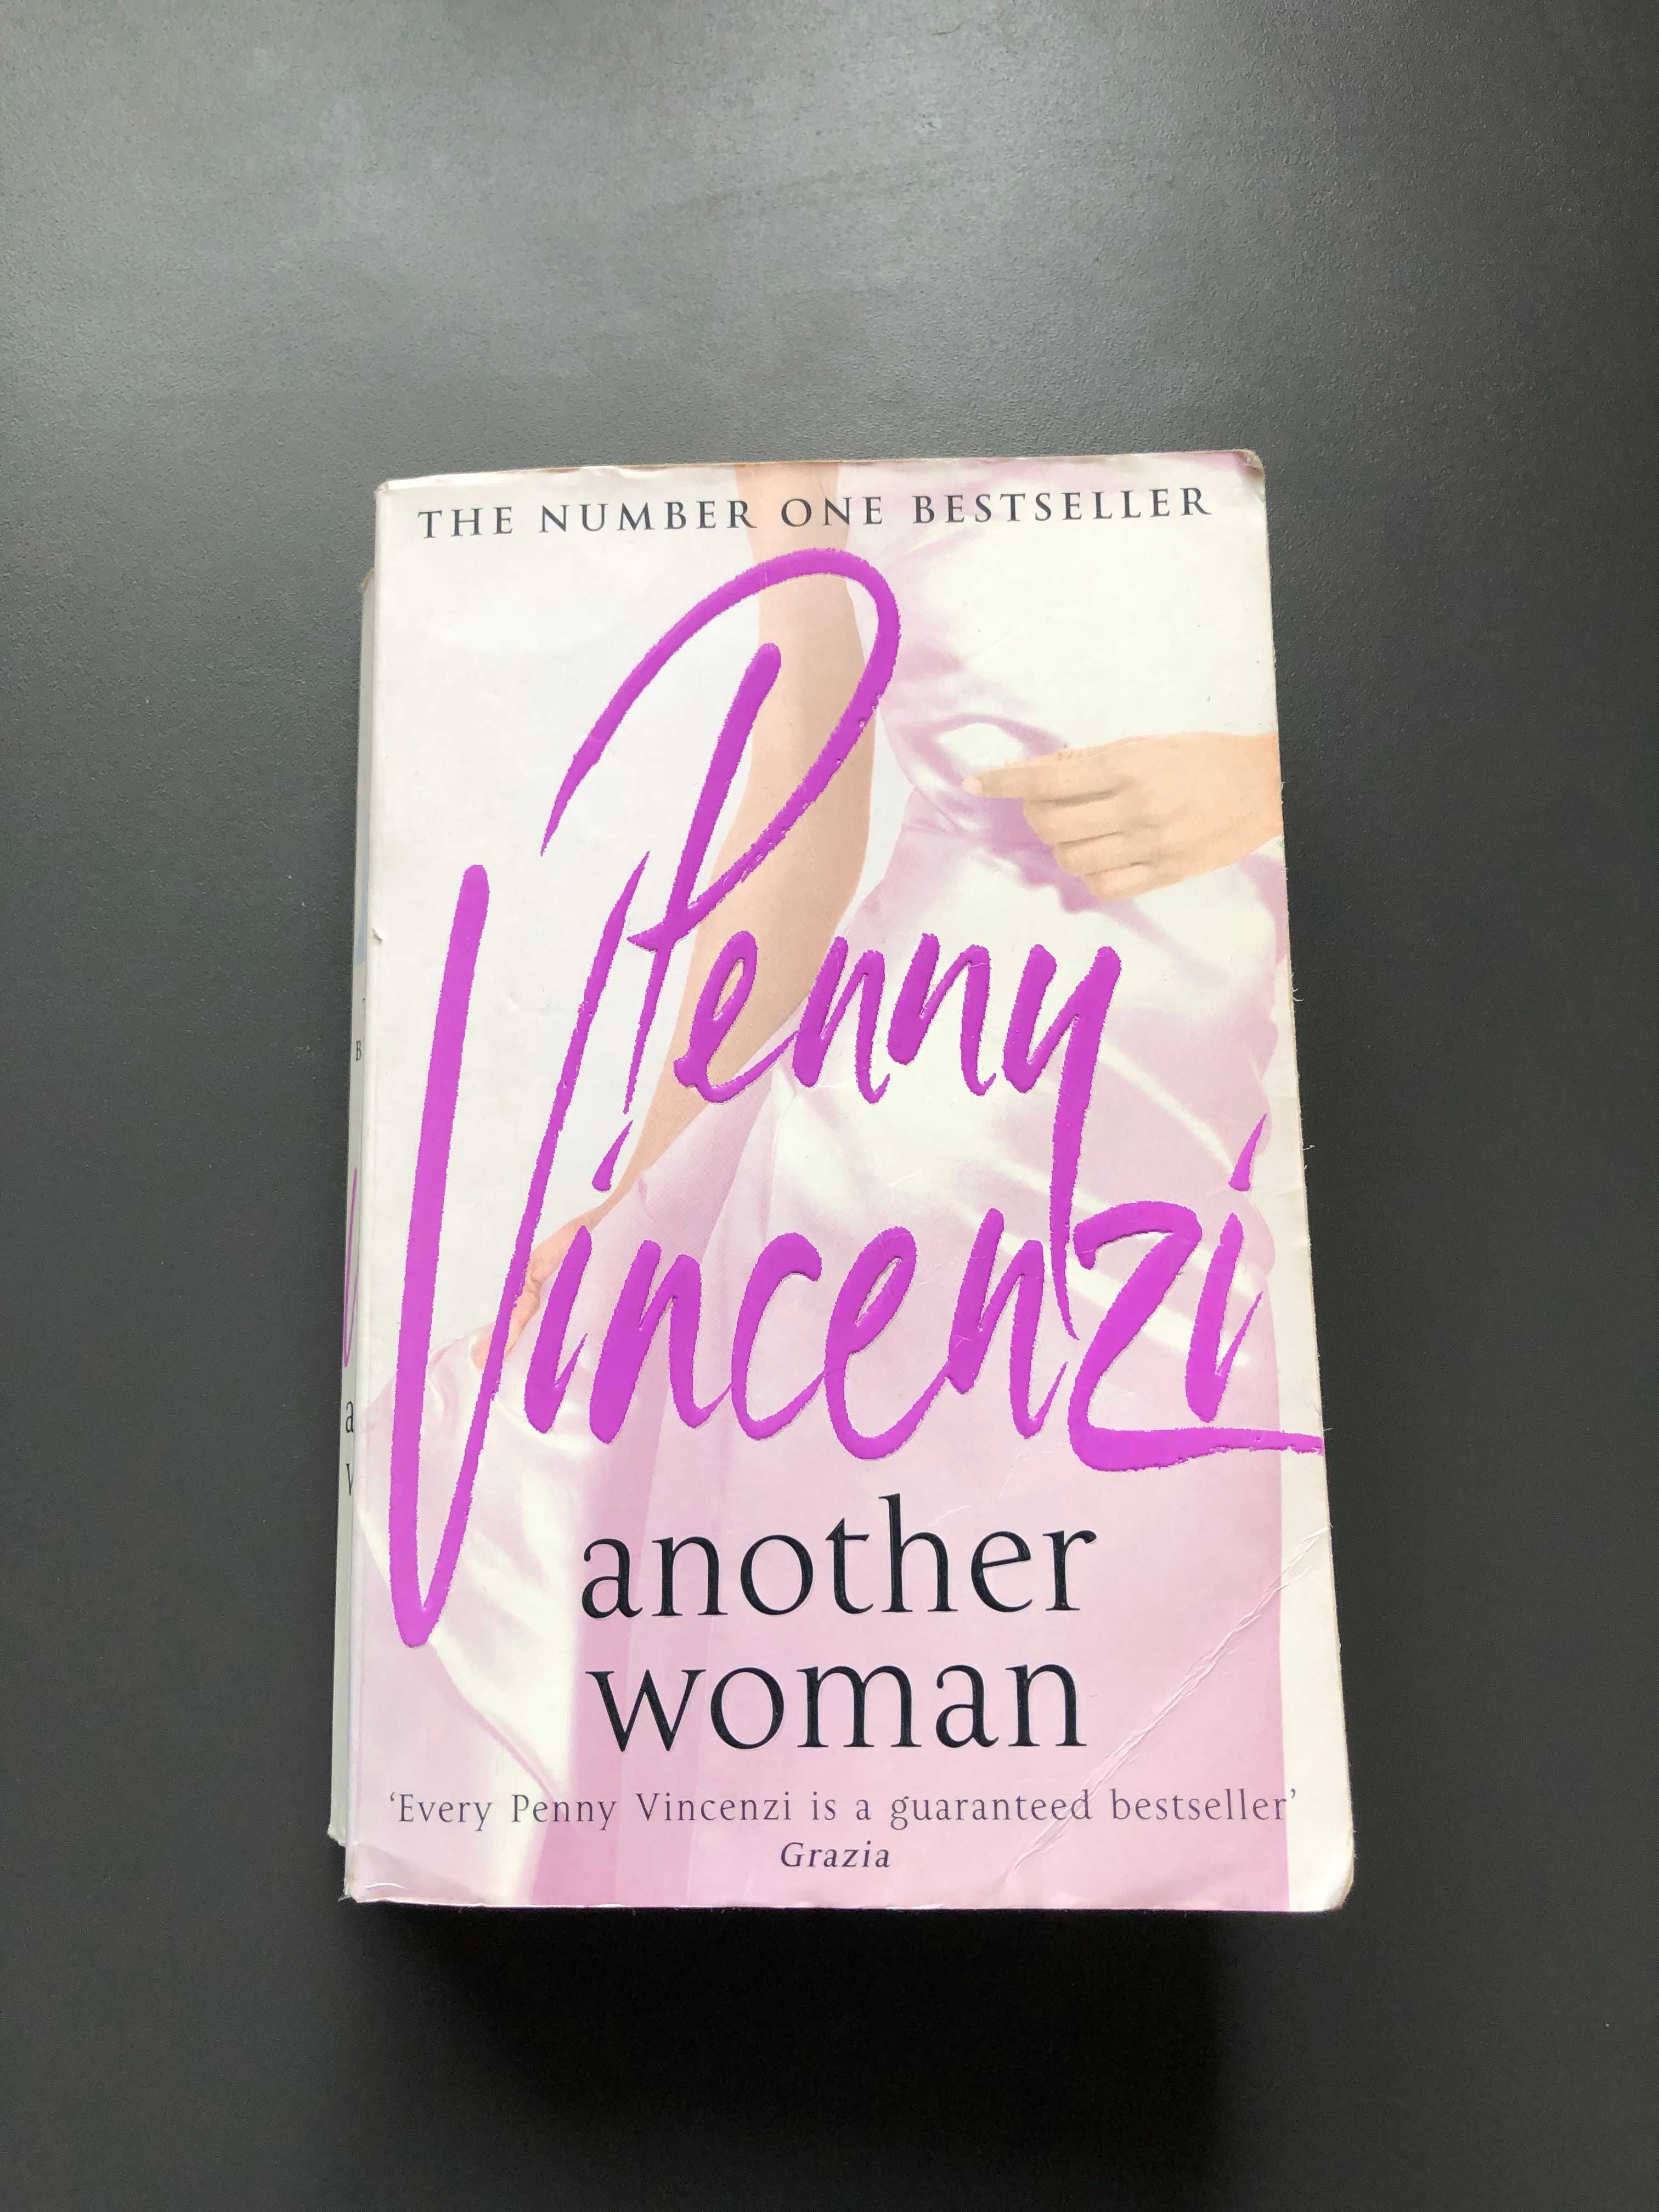 Another Woman - Penny Vincenzi